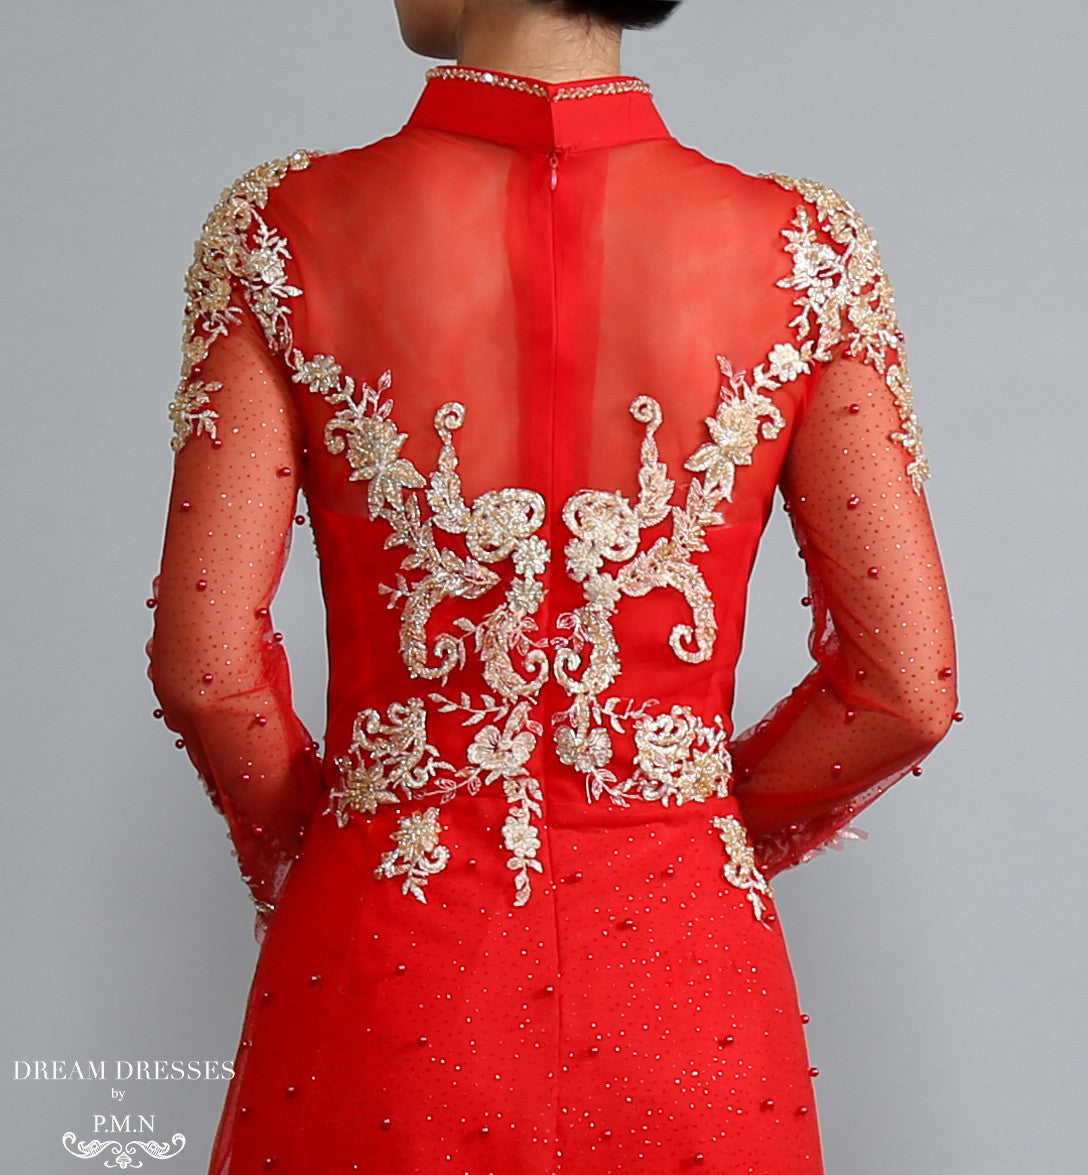 Red Ao Dai with Gold Lace | Vietnamese Lace Bridal Dress (#RAISSA)